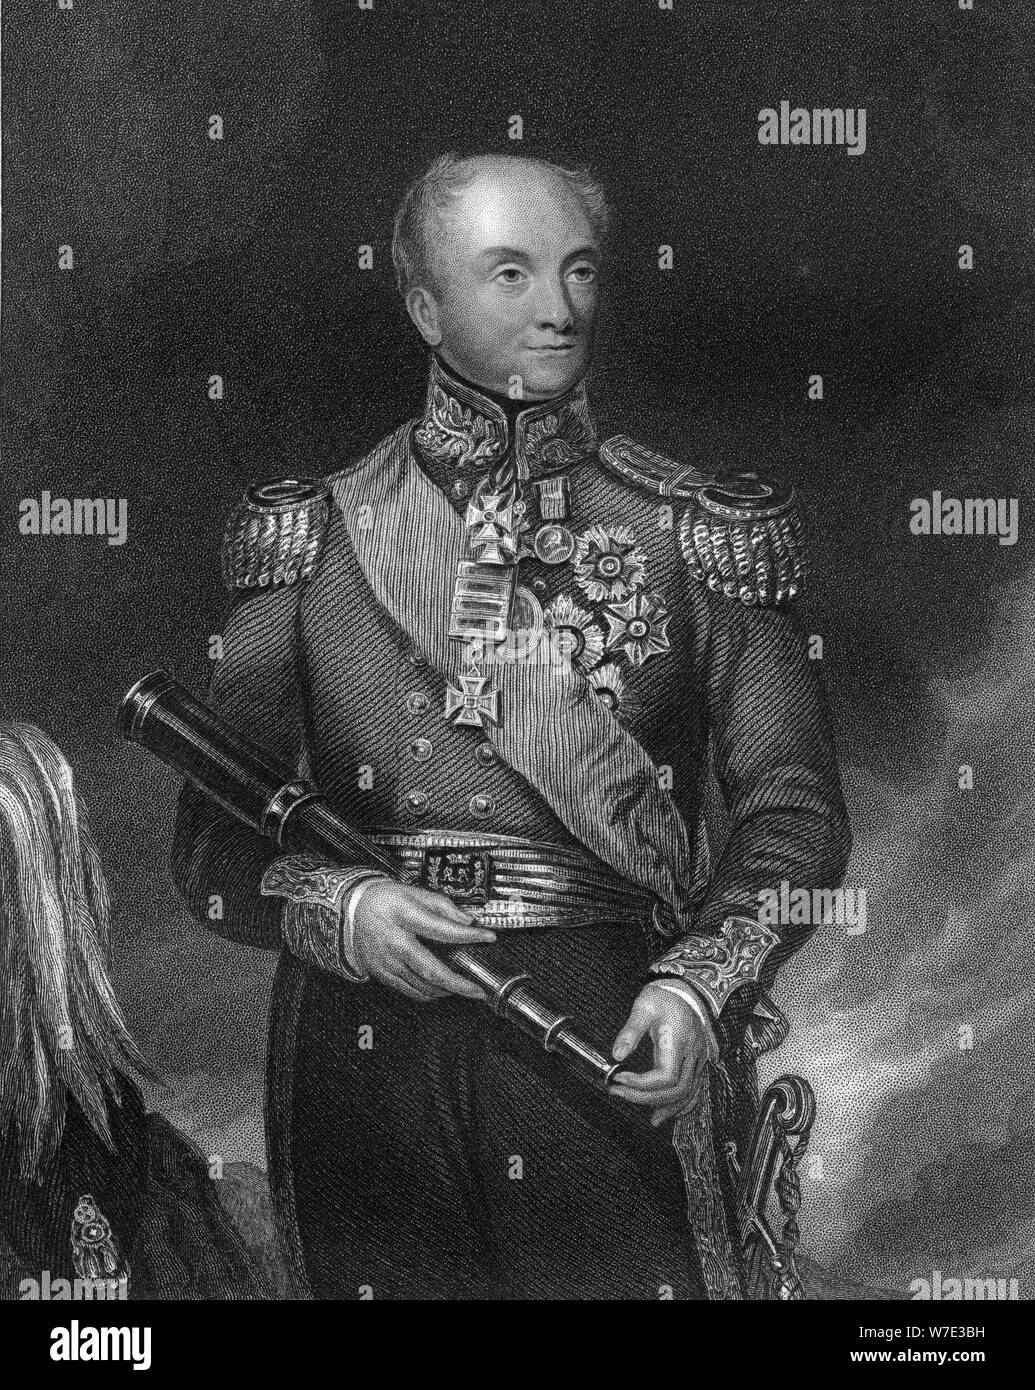 General Rowland Hill, Commander-in-Chief of the British Army, c1830-c1835 (c1857).Artist: WH Mote Stock Photo